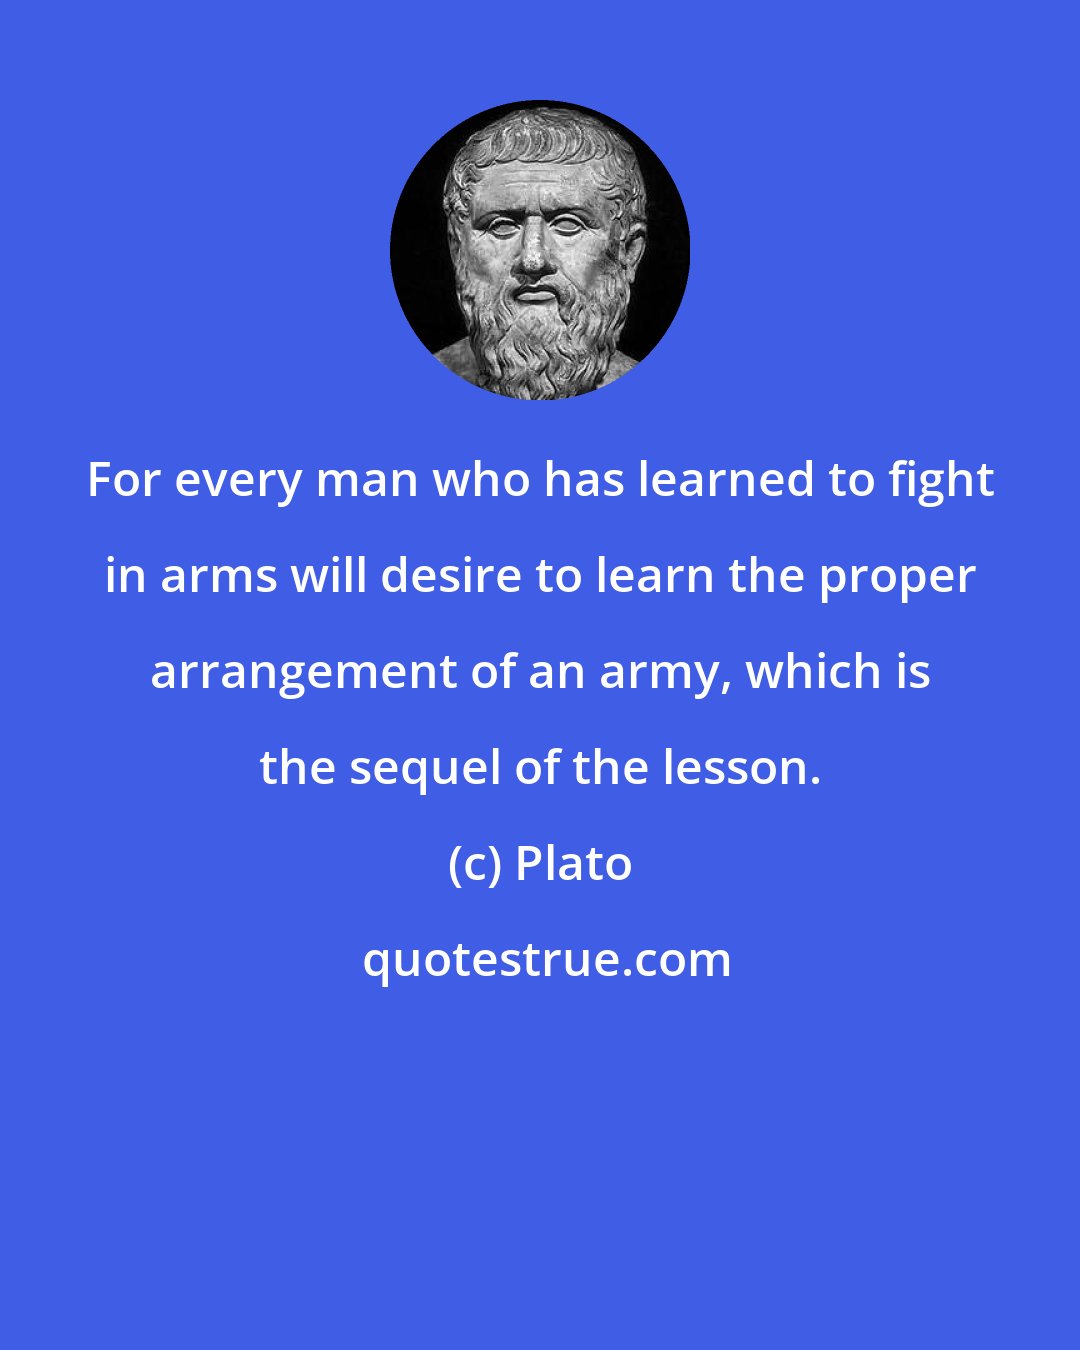 Plato: For every man who has learned to fight in arms will desire to learn the proper arrangement of an army, which is the sequel of the lesson.